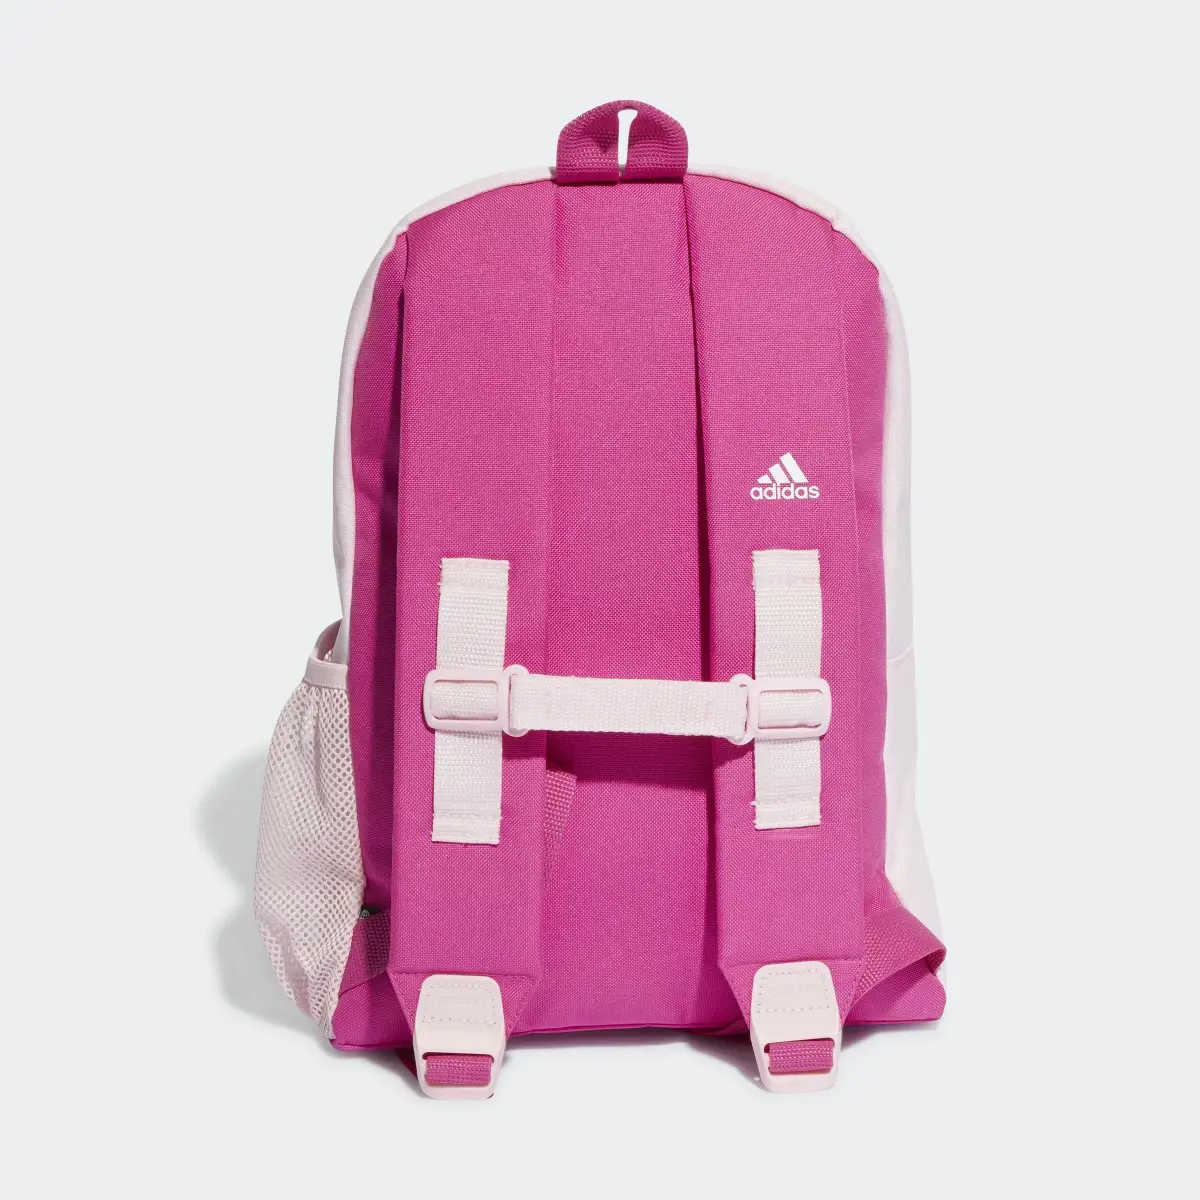 Adidas Graphic Backpack. 3